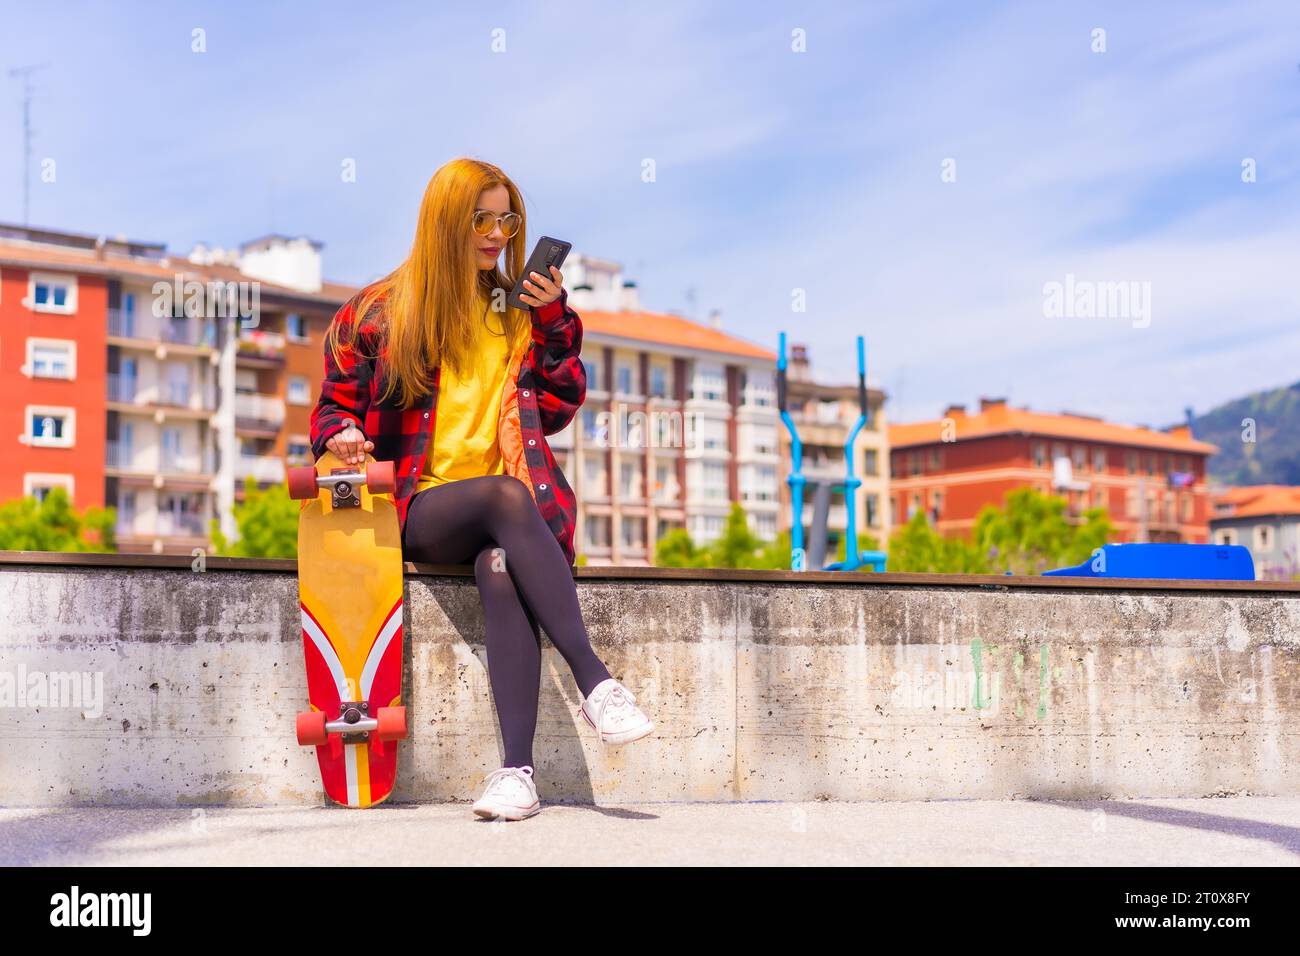 Skater woman in a yellow t-shirt, red plaid shirt and sunglasses, sitting with skateboarding in the city sending an audio message with the phone Stock Photo